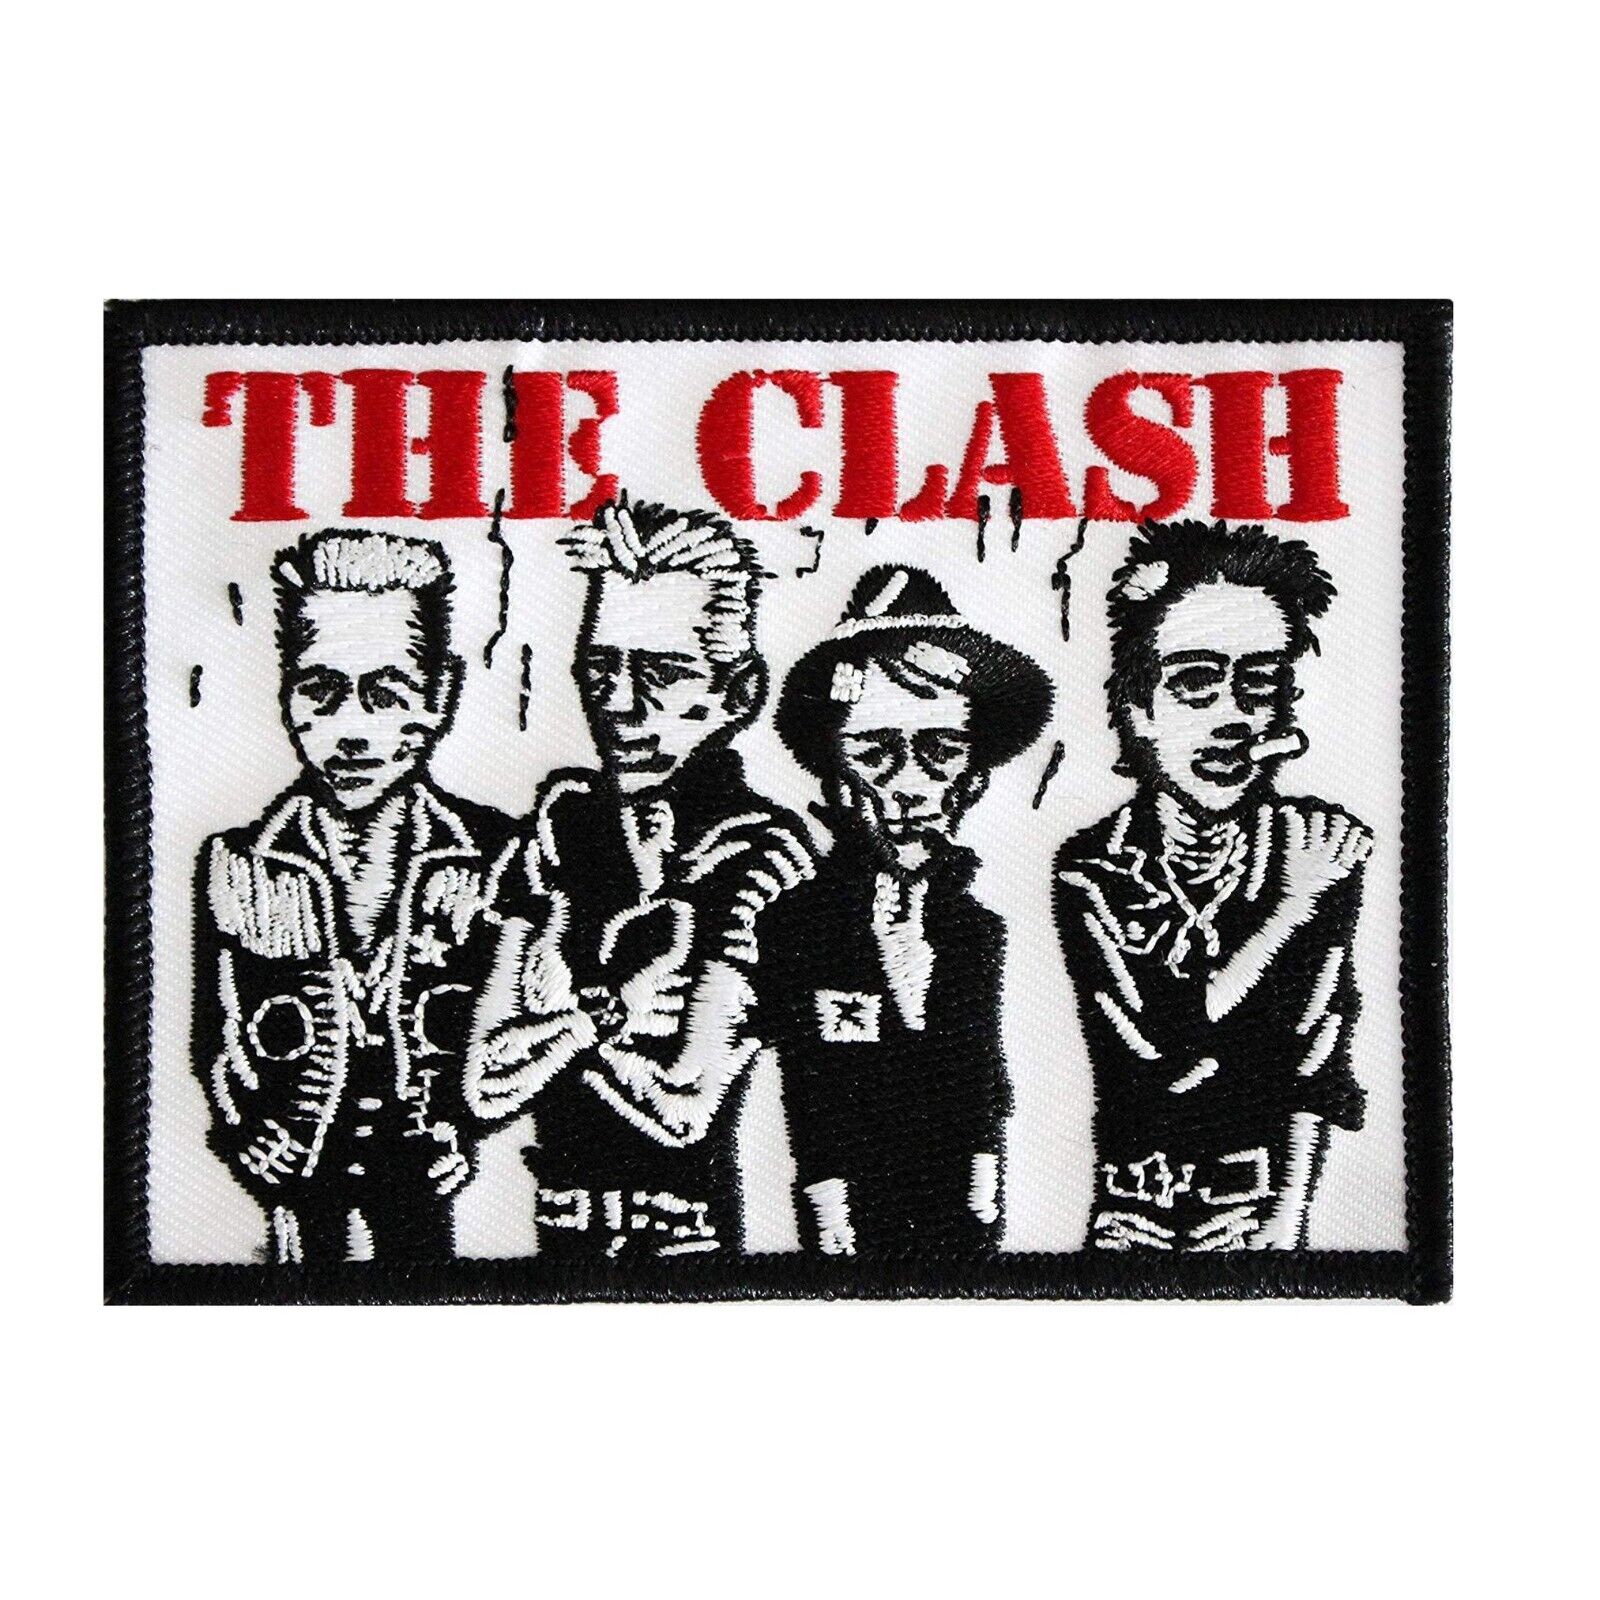 The Clash Caricature Embroidered Iron On Patch - Rock Music Band 065-i